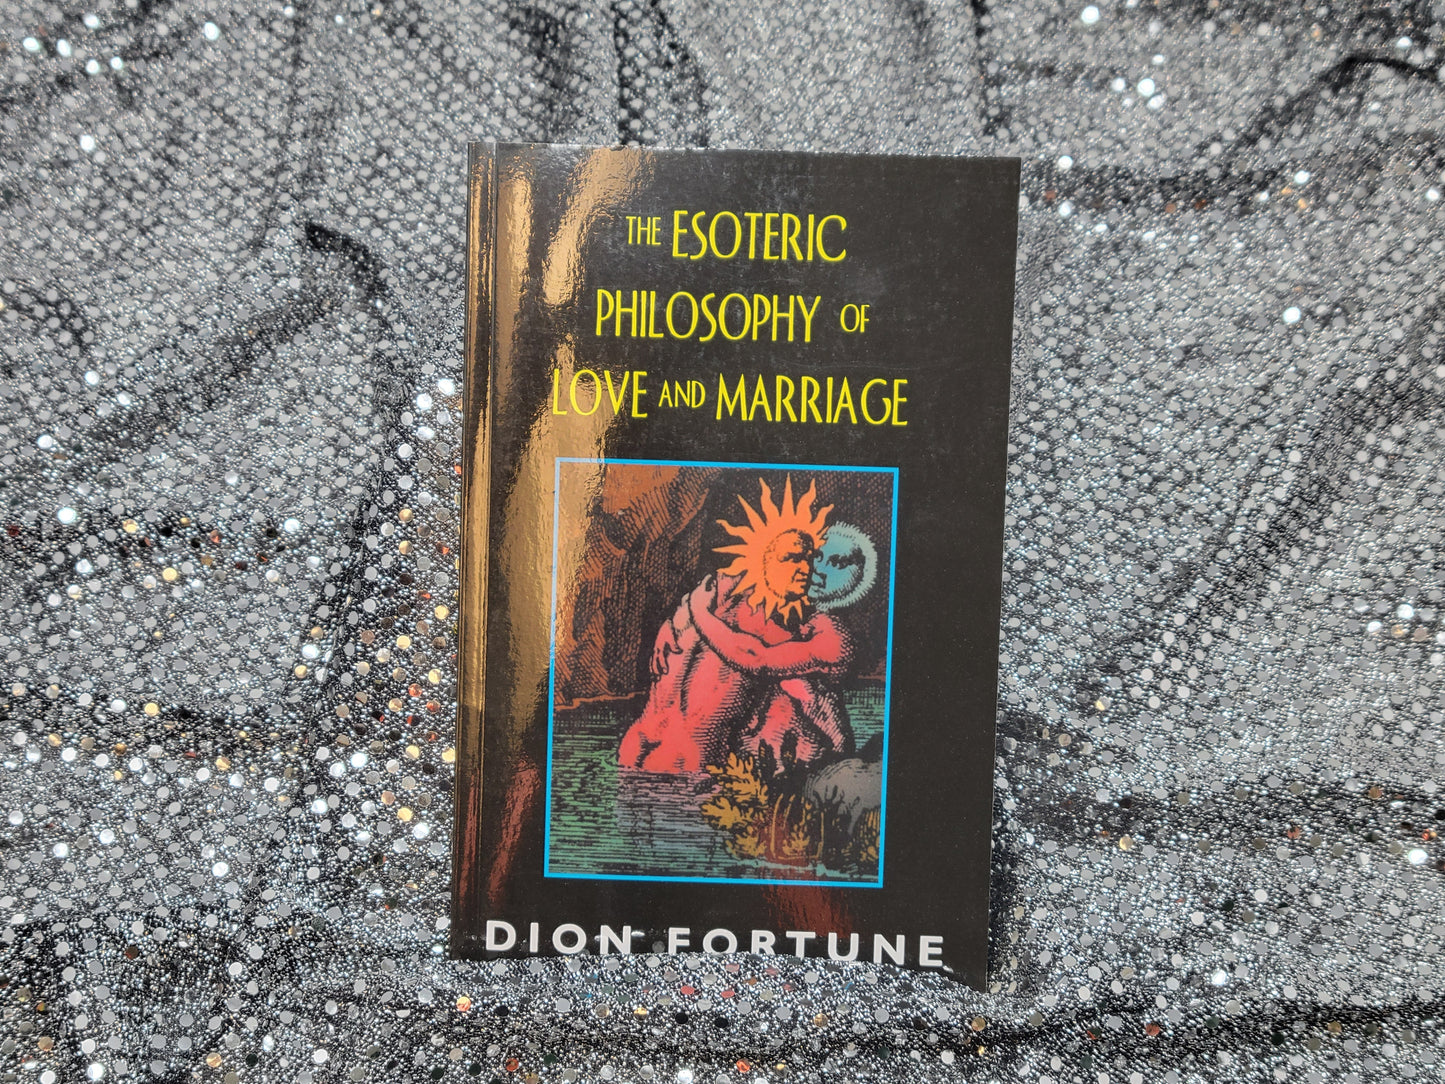 The Esoteric Philosophy of Love and Marriage - Dion Fortune